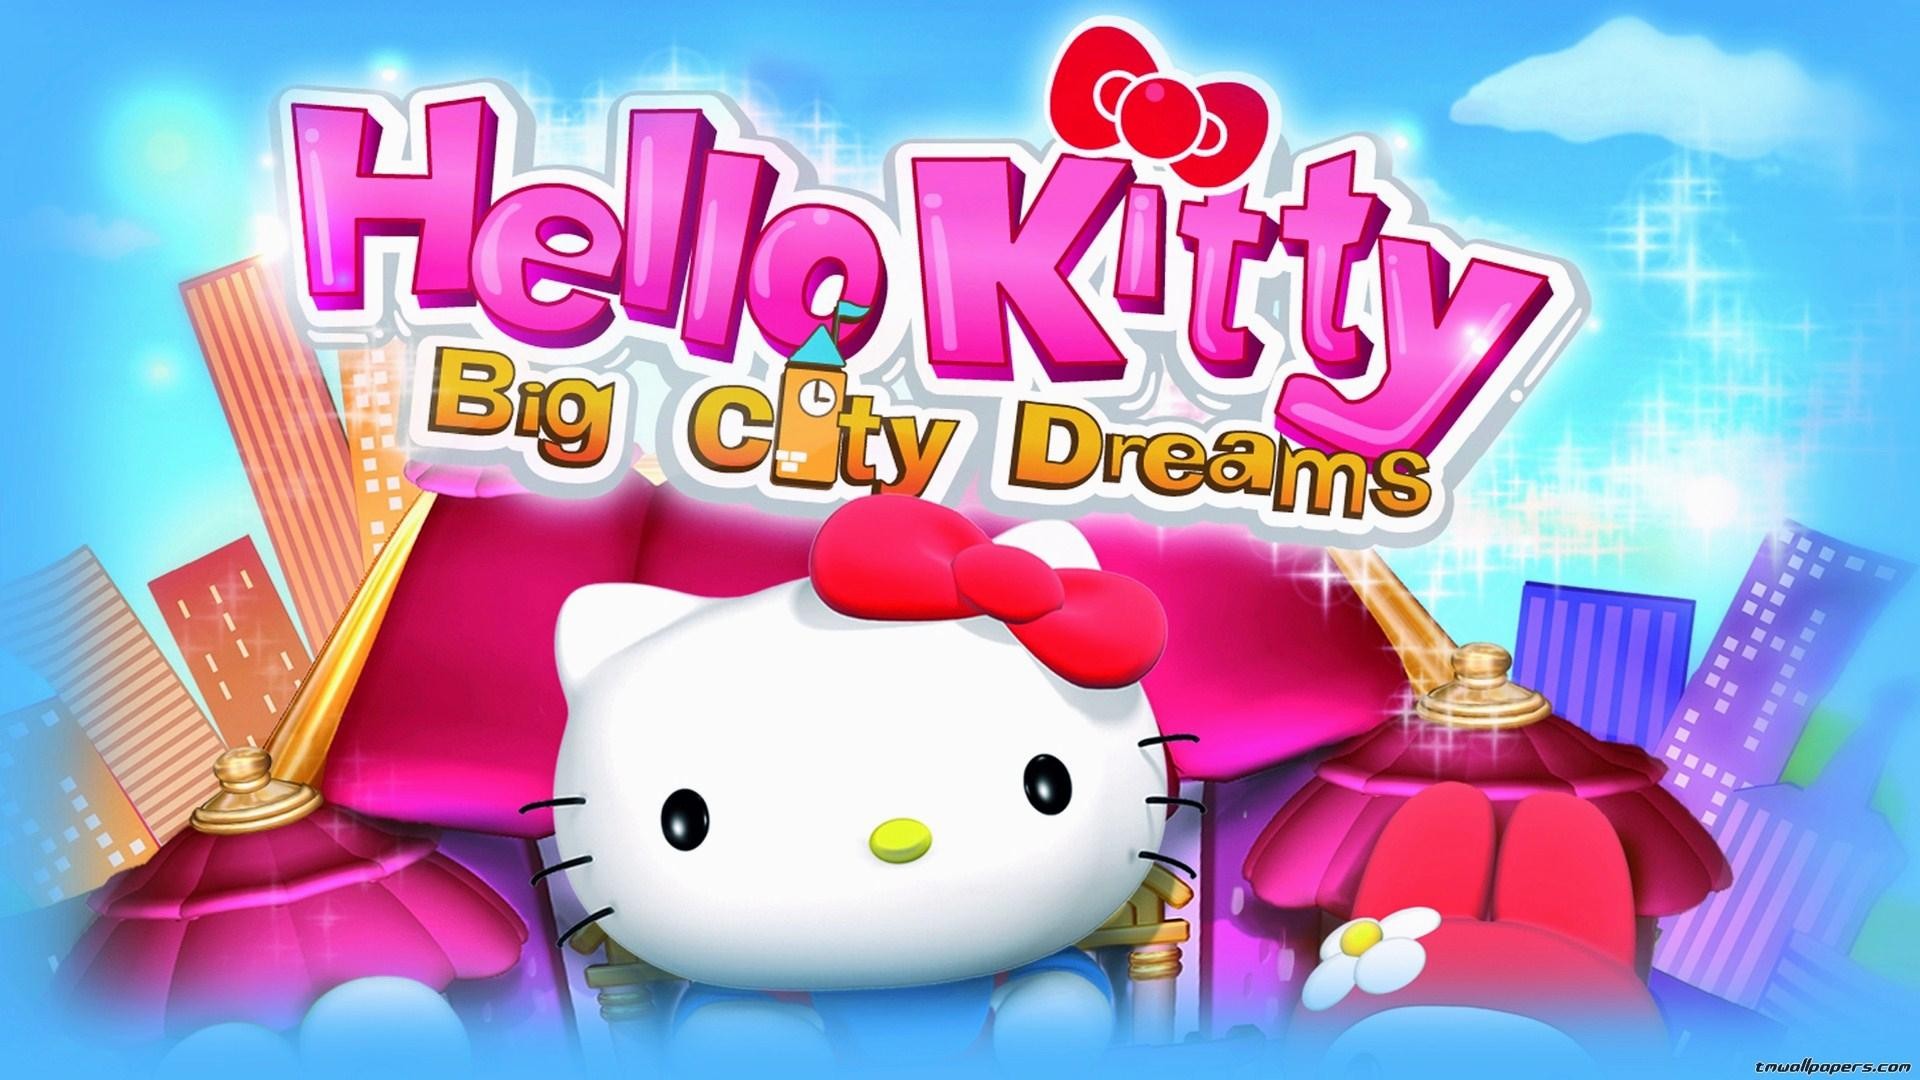 Best Hello Kitty Wallpaper with resolution 1920X1080 pixel. You can use this wallpaper as background for your desktop Computer Screensavers, Android or iPhone smartphones